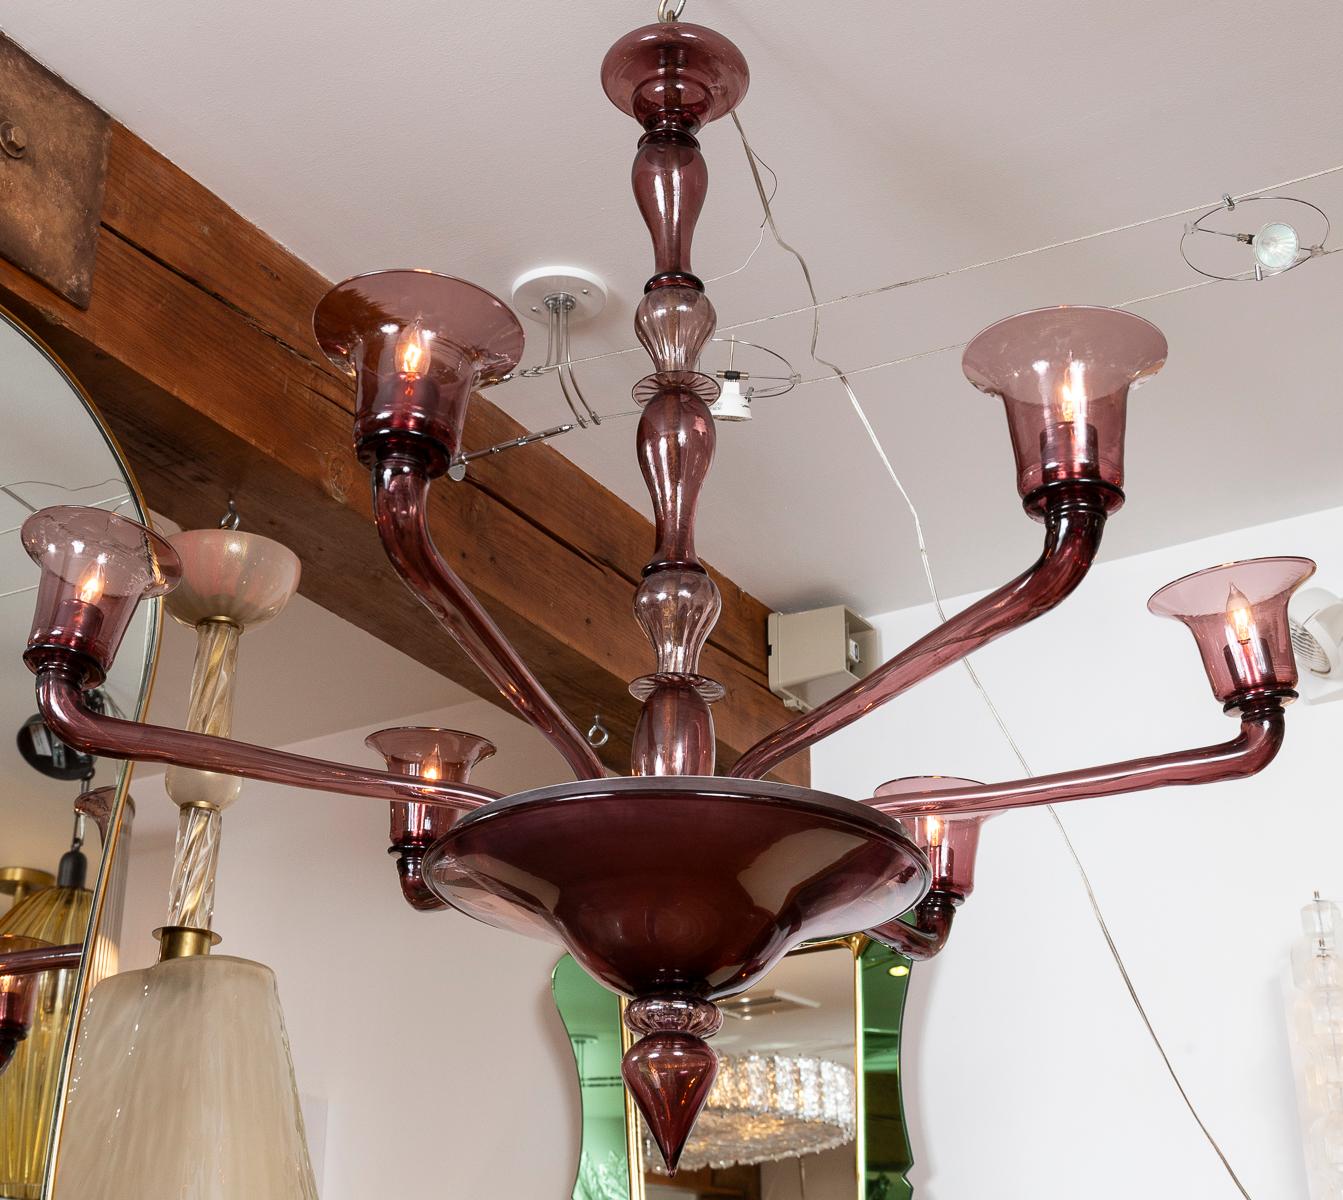 Mid-20th Century Rare Veronese Six Arm Uplight Murano Chandelier In Plum By Venini For Sale